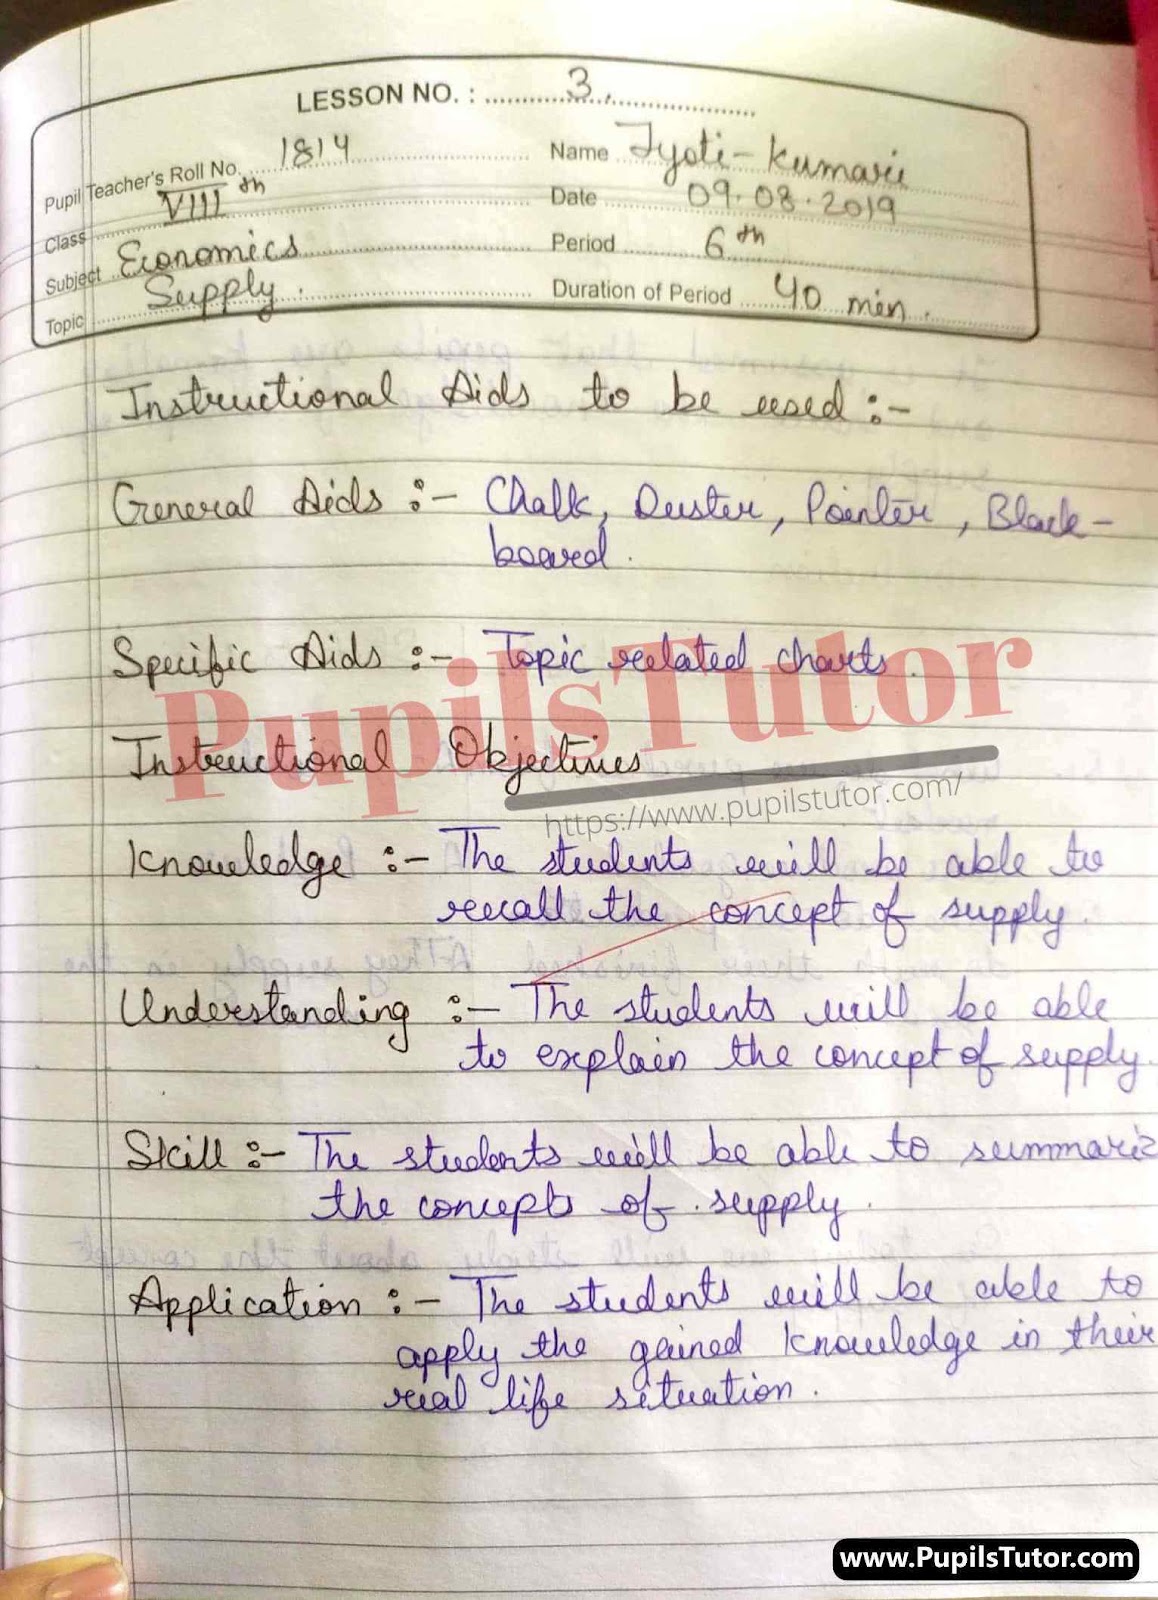 Law Of Supply Lesson Plan – (Page And Image Number 1) – Pupils Tutor